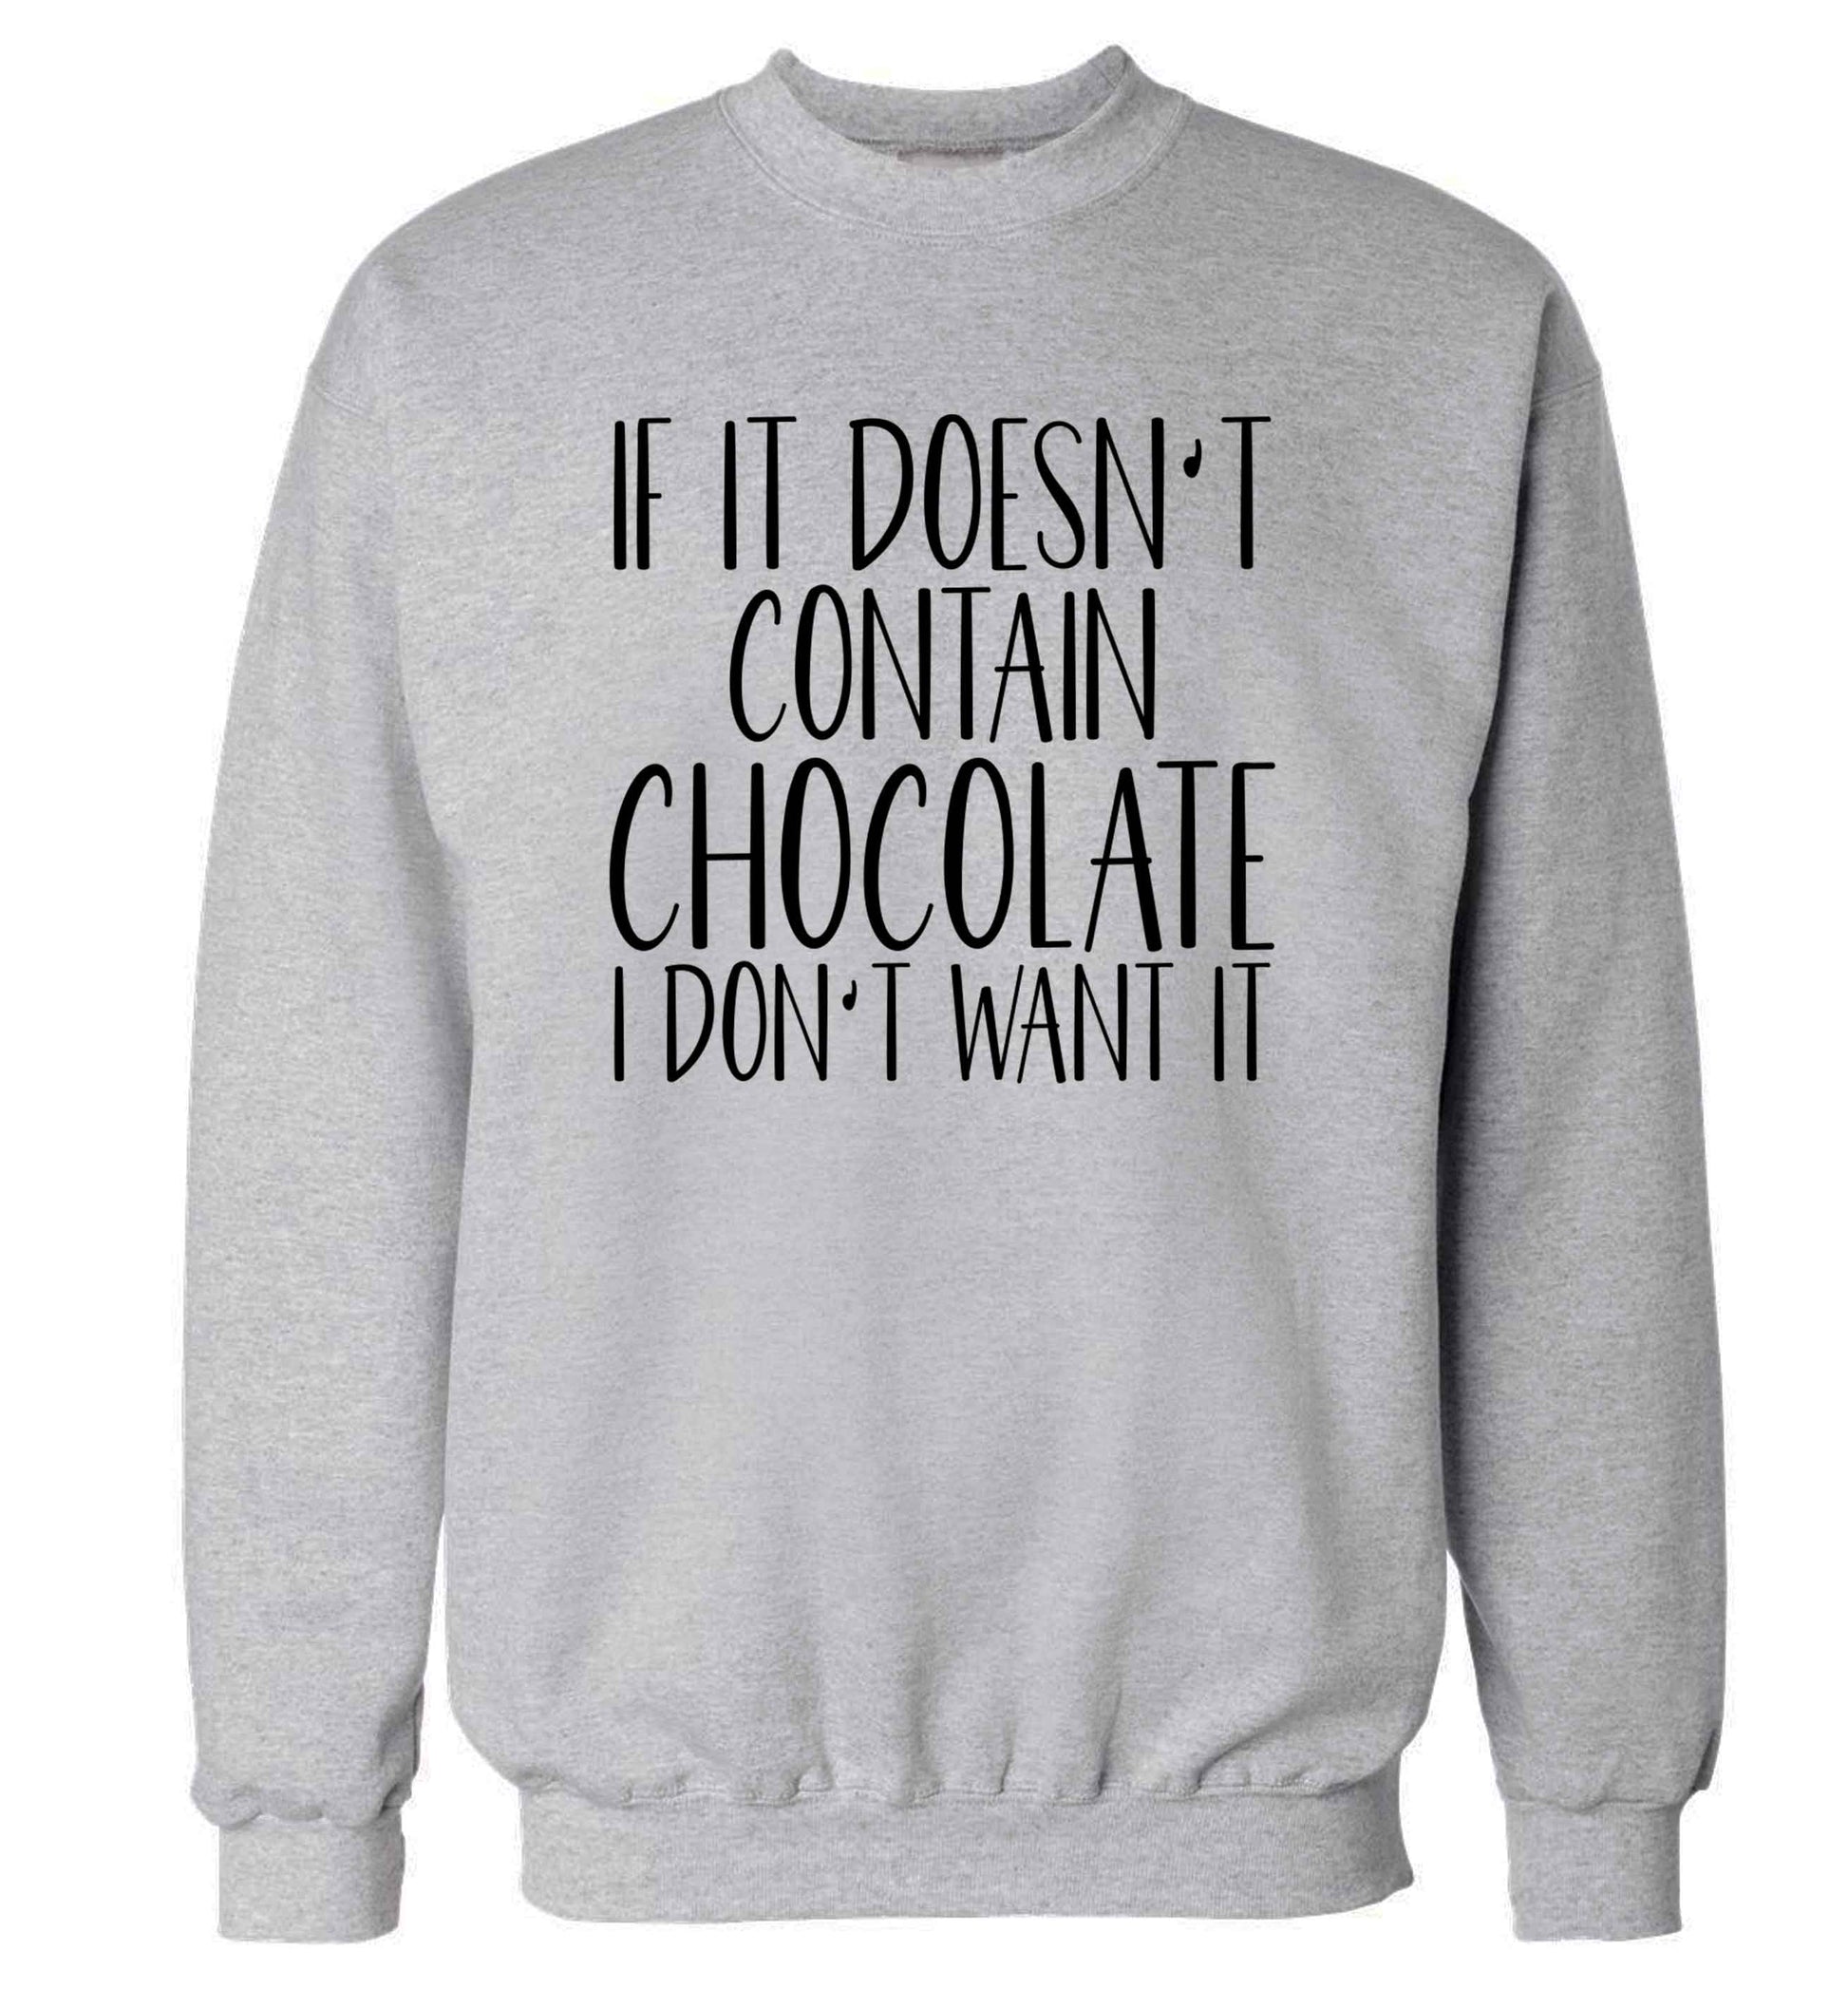 If it doesn't contain chocolate I don't want it adult's unisex grey sweater 2XL